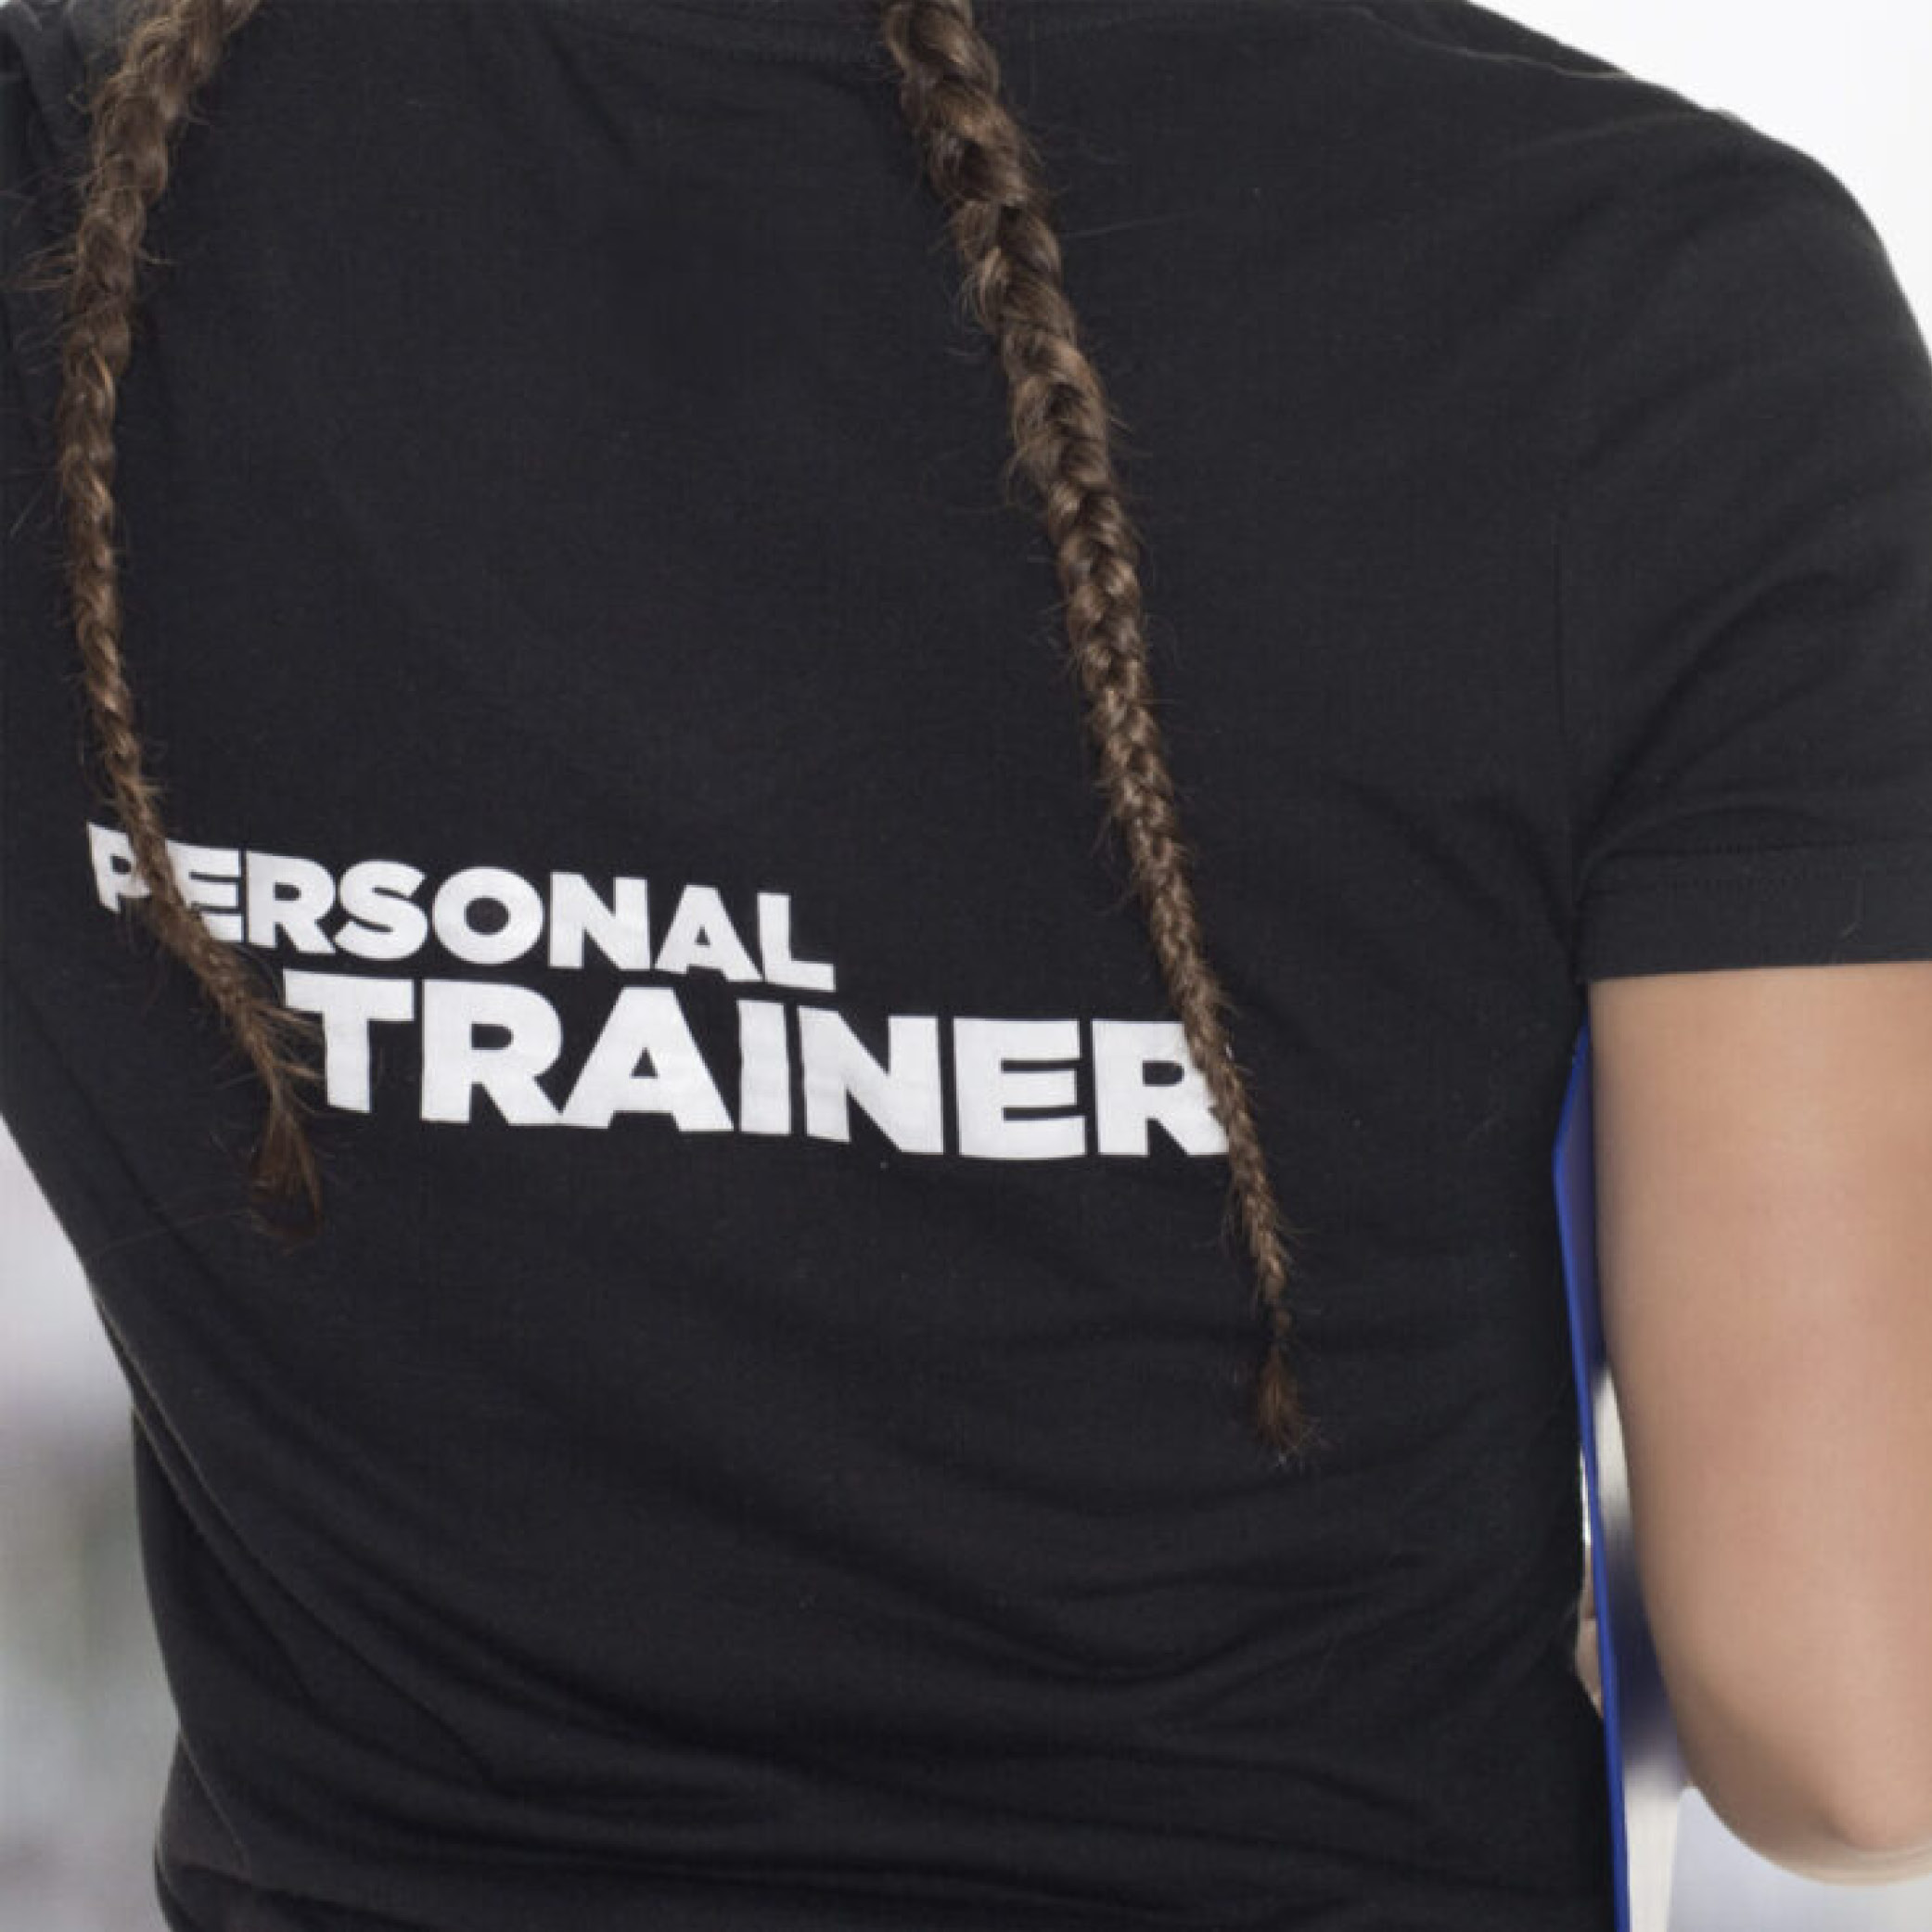                     PERSONAL TRAINER/Corso online